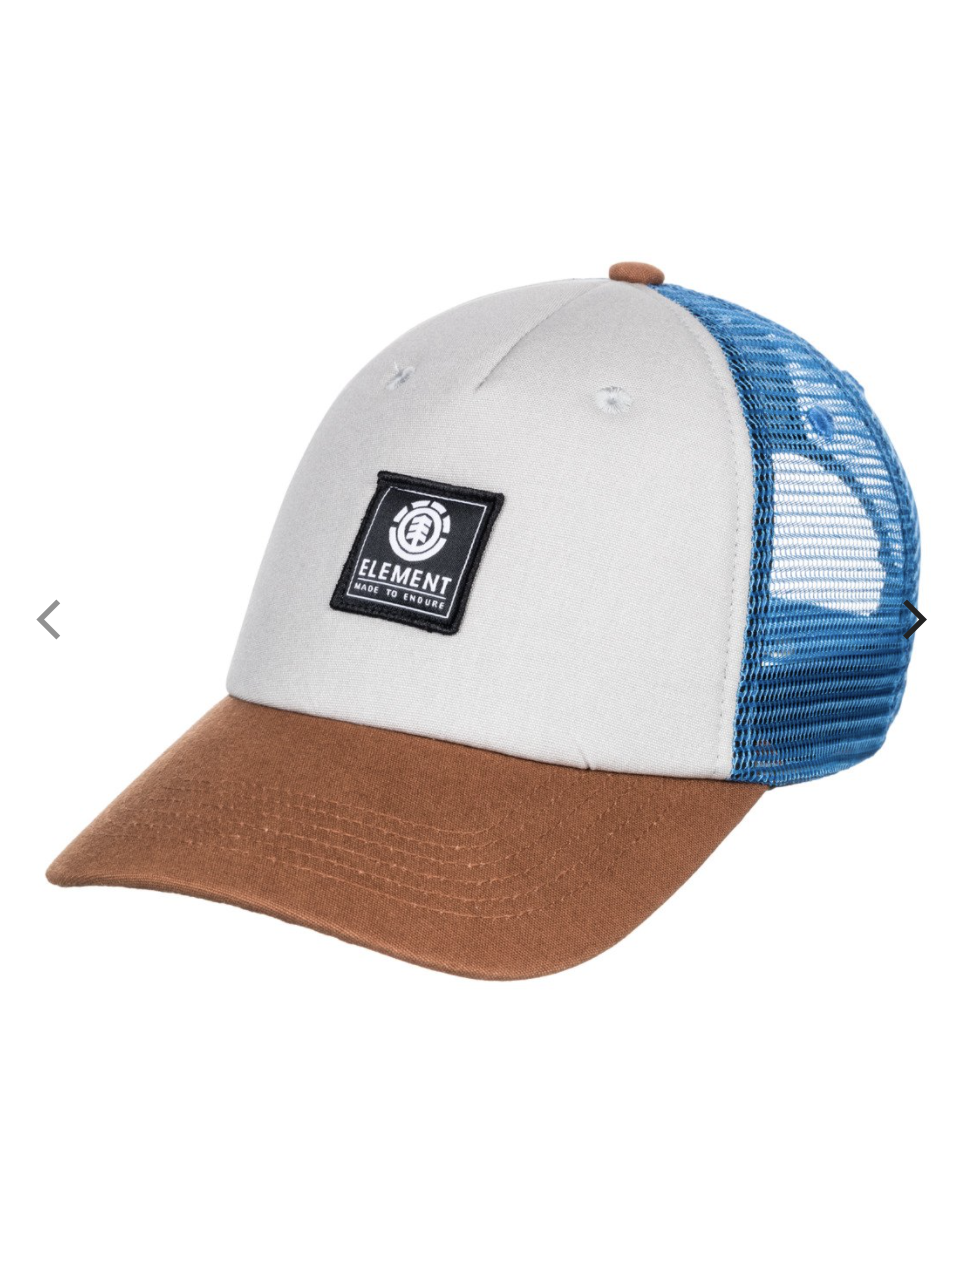 ICON MESH CAP PUSSYWILLOW GRY ELEMENT